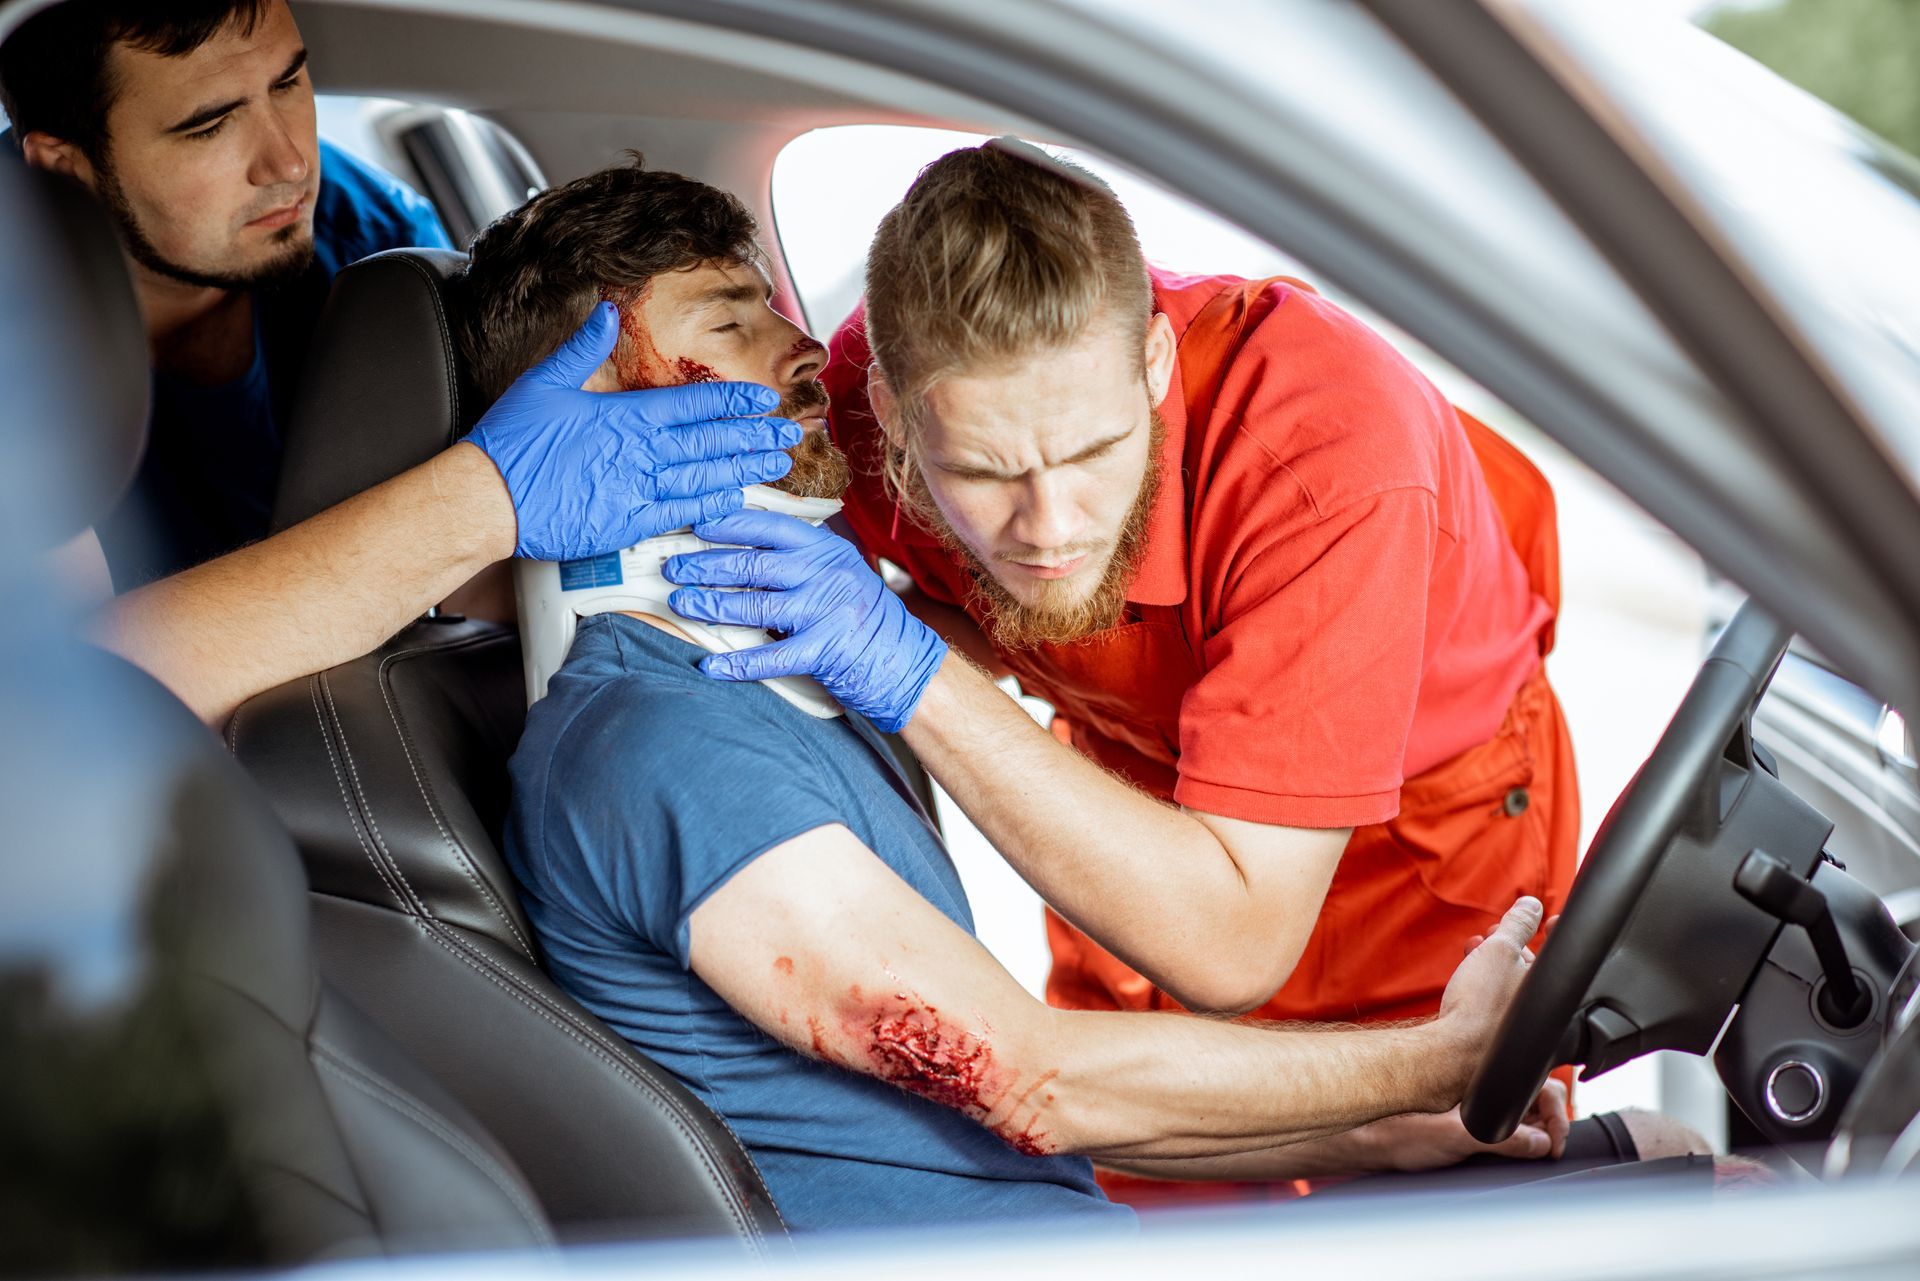 Illustration of a person receiving chiropractic care after an auto accident. T